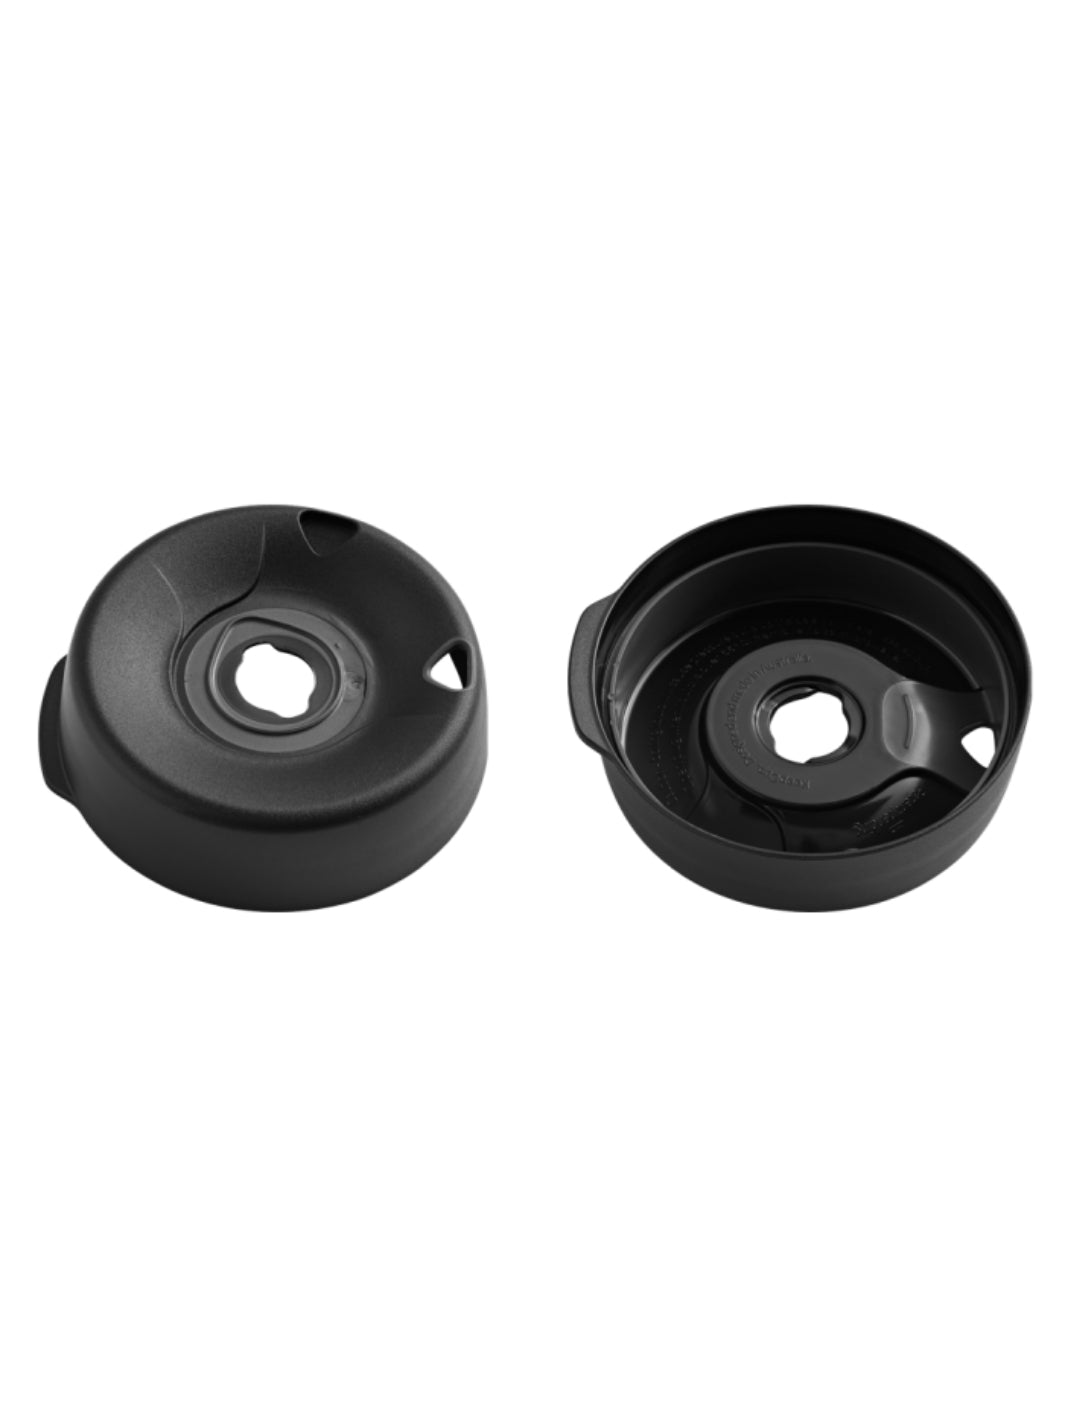 Replacement Lids, Replacement Parts